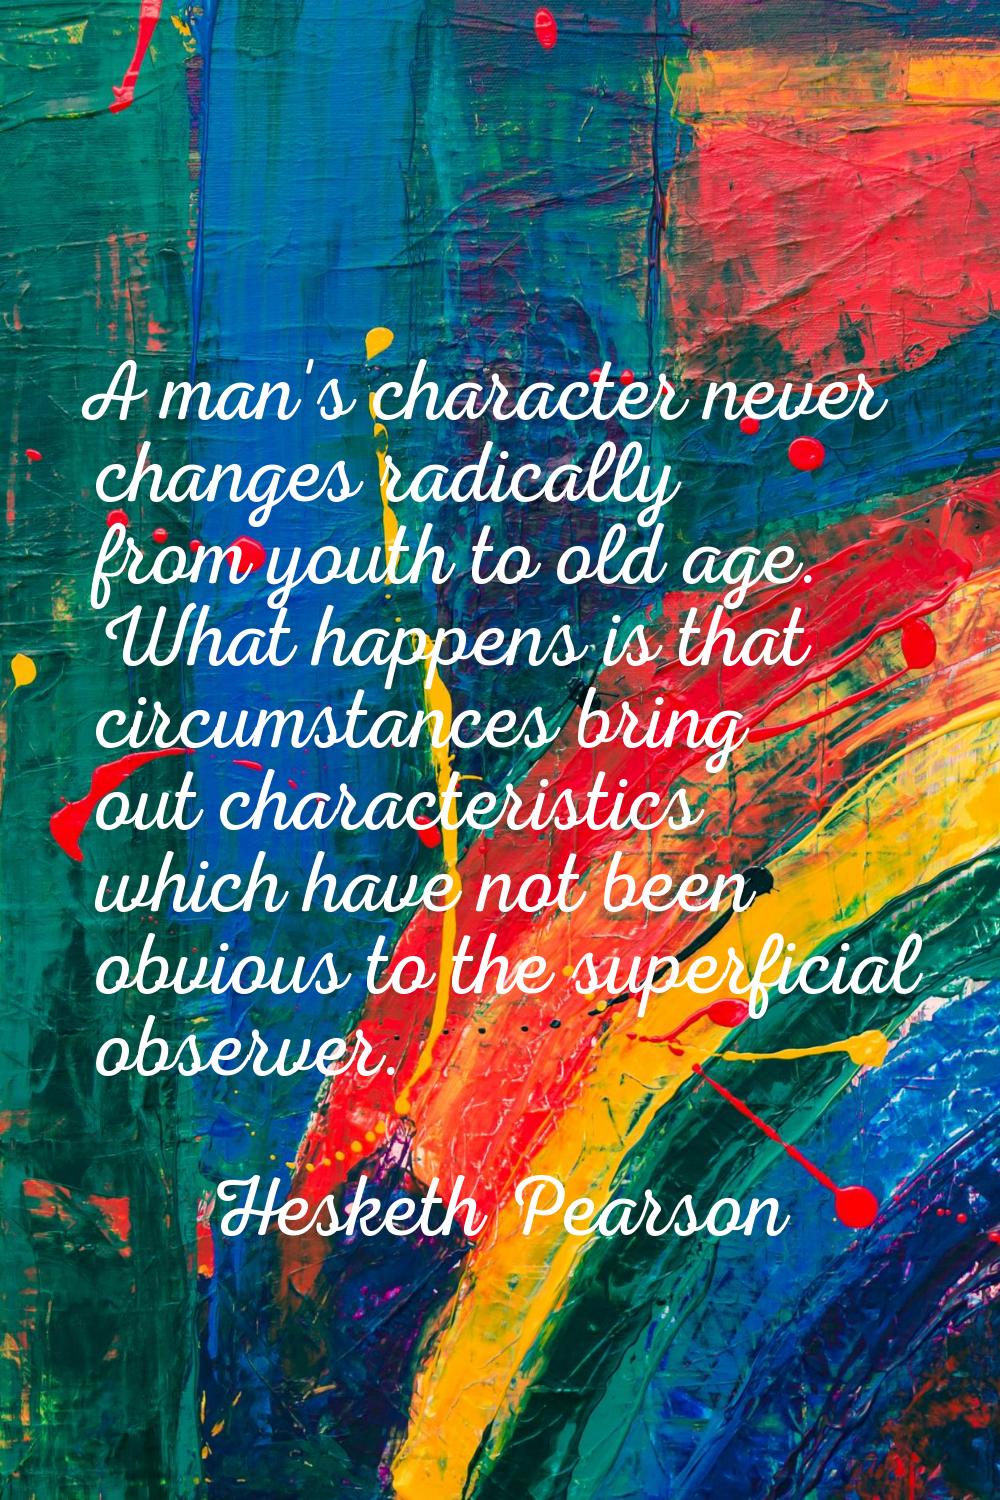 A man's character never changes radically from youth to old age. What happens is that circumstances